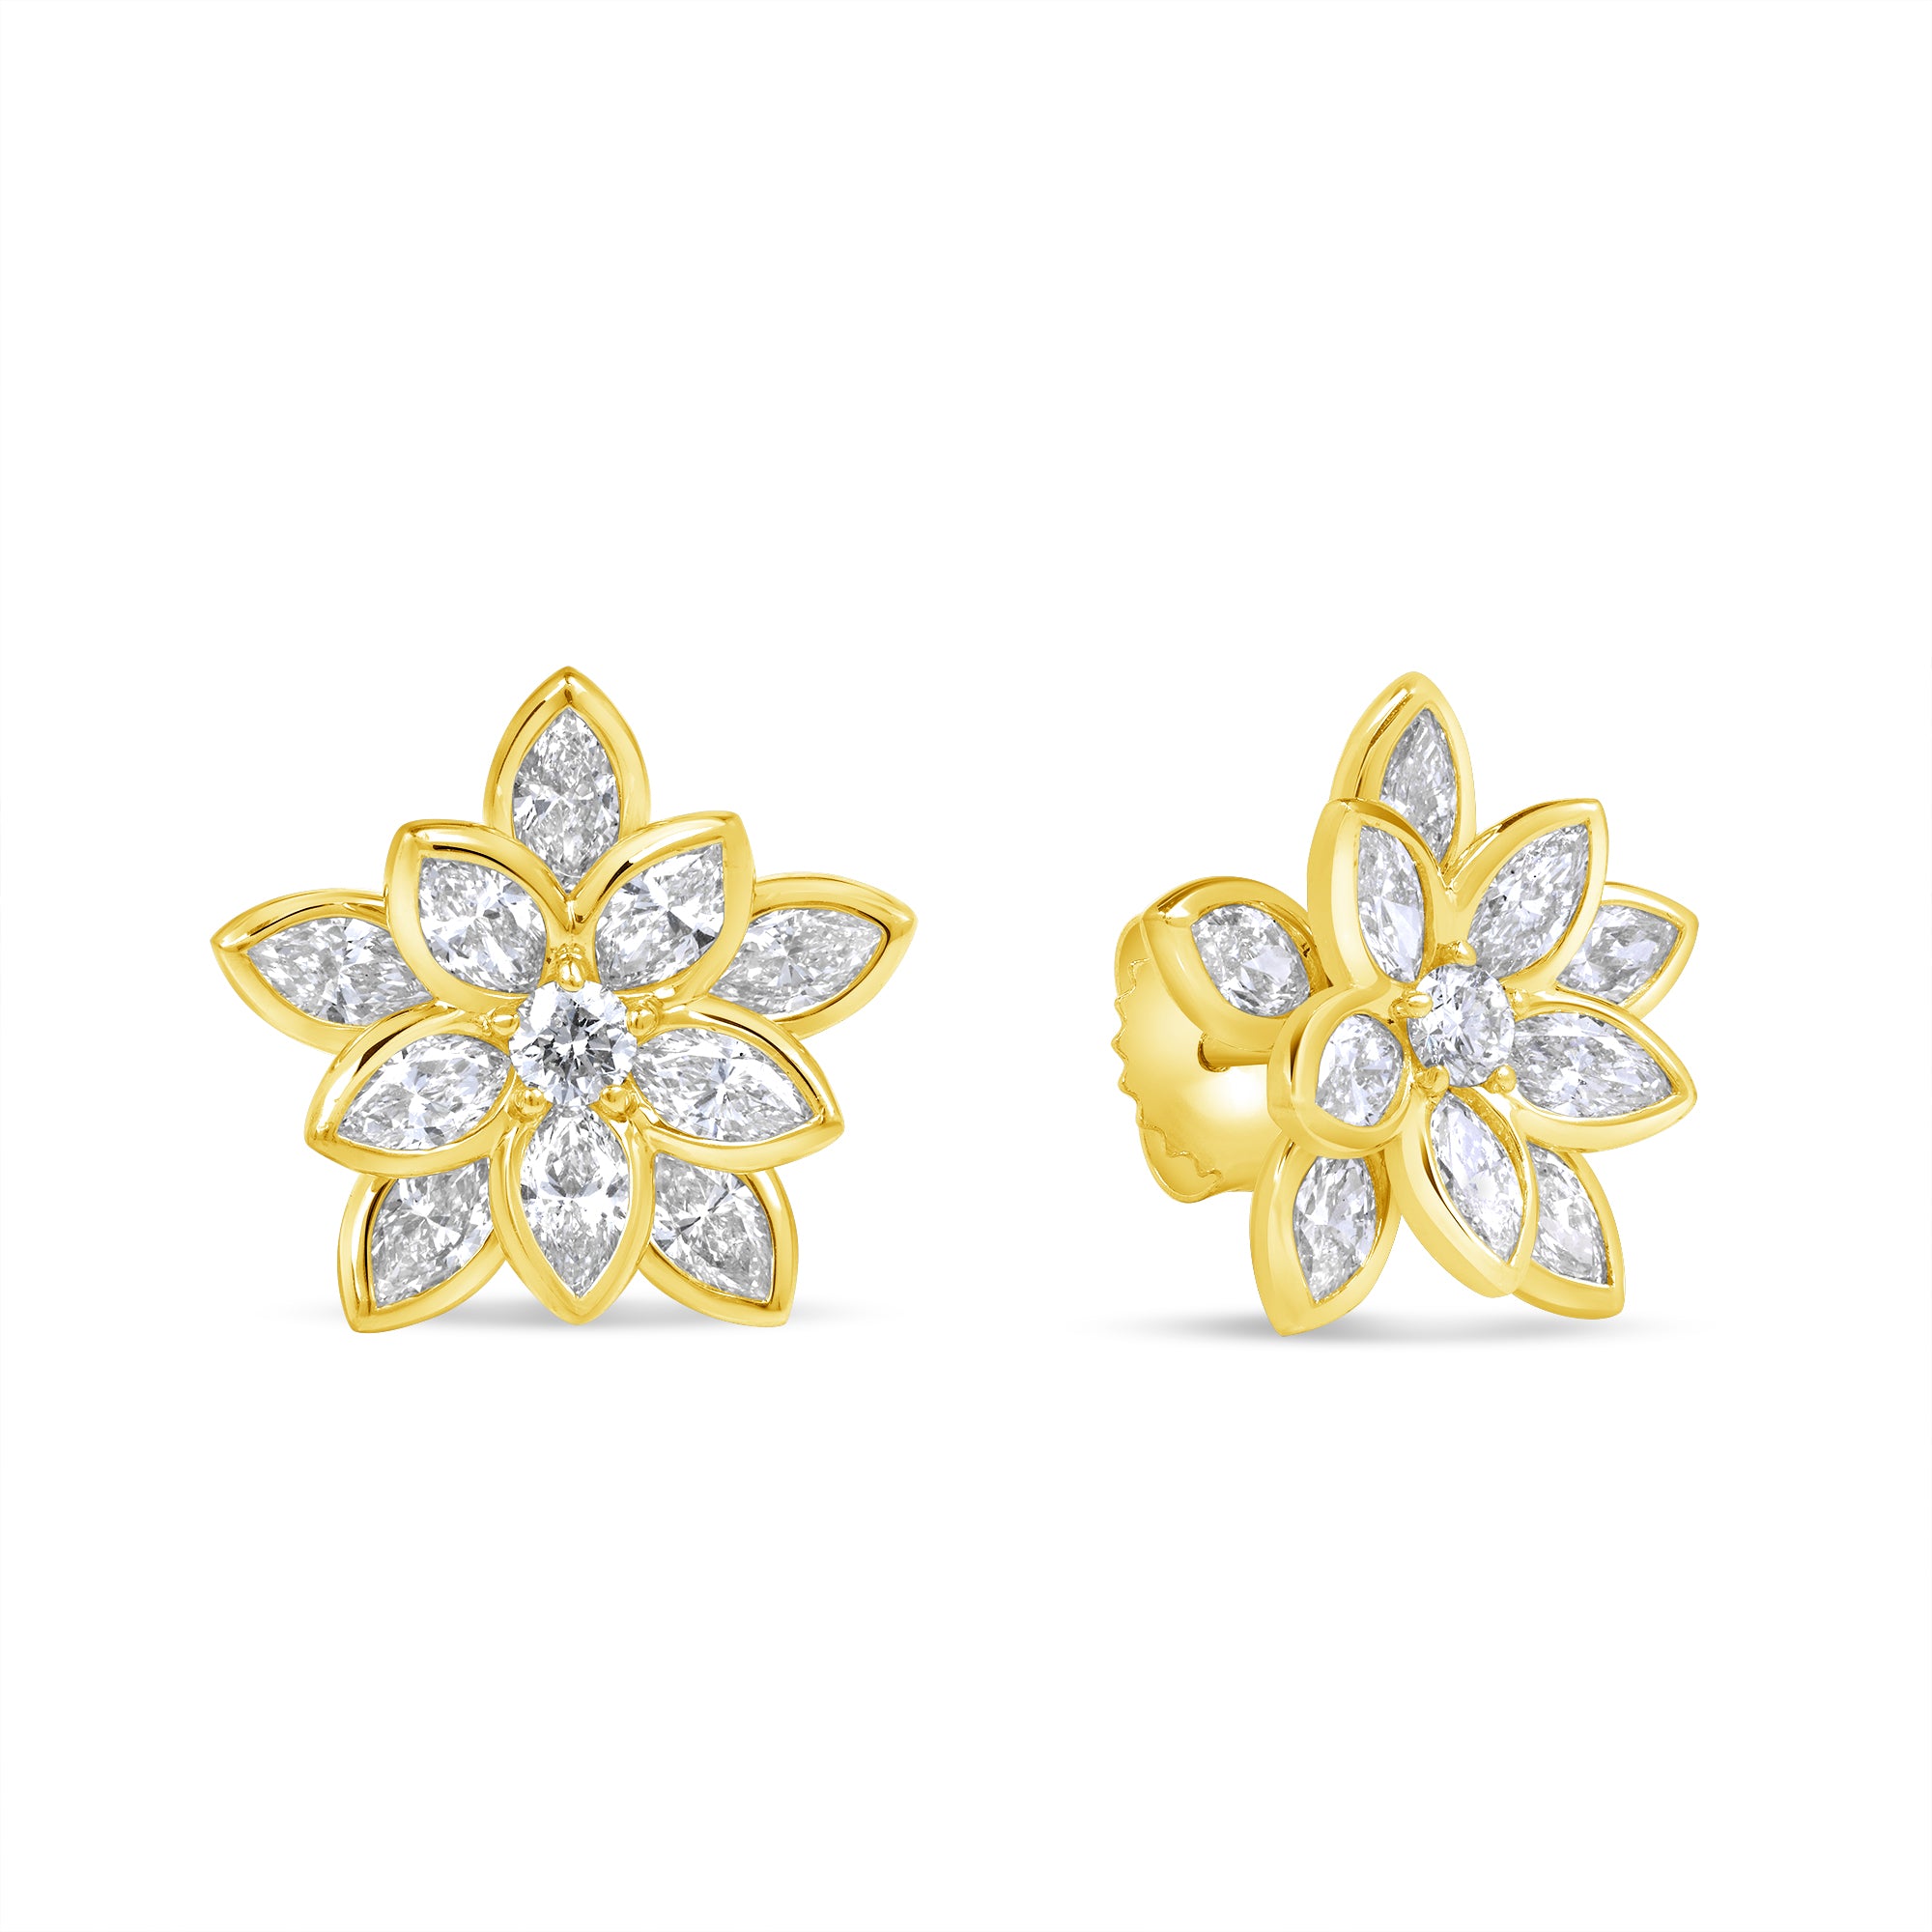 Dimensional Flower Shape Marquise & Round Brilliant Diamond Stud Earrings in 18K Yellow Gold